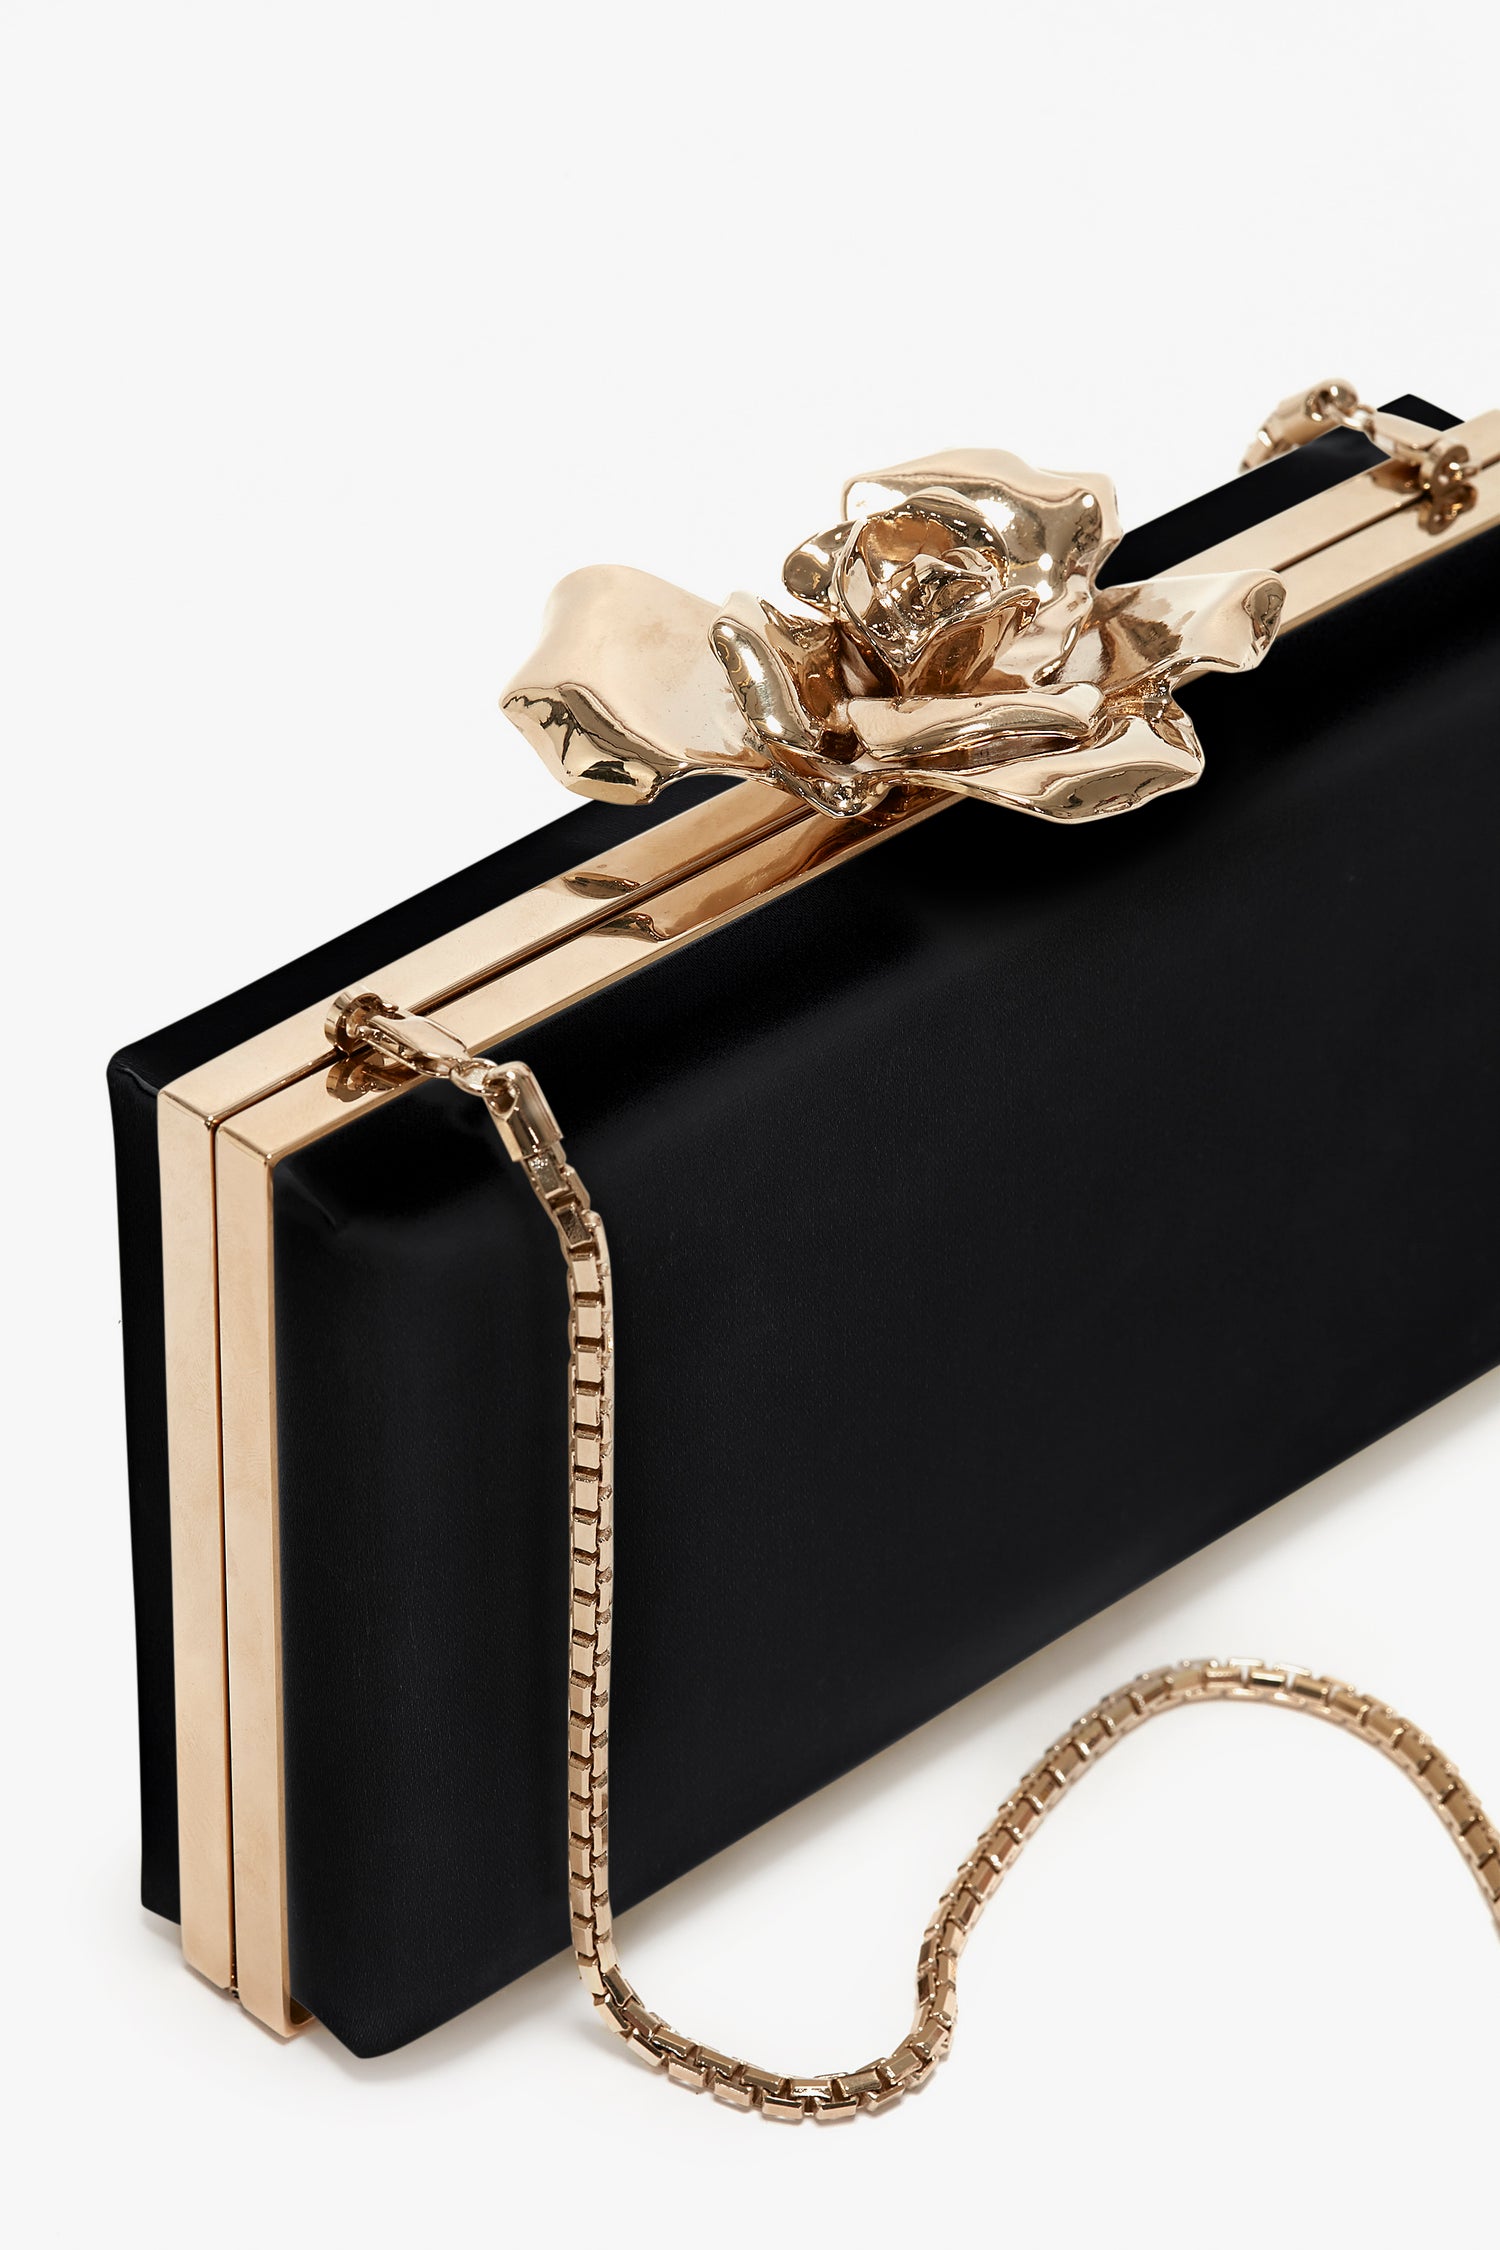 Elegant Victoria Beckham black Frame Flower Minaudiere clutch with gold trim and a flower clasp, featuring a chain strap, isolated on a white background.